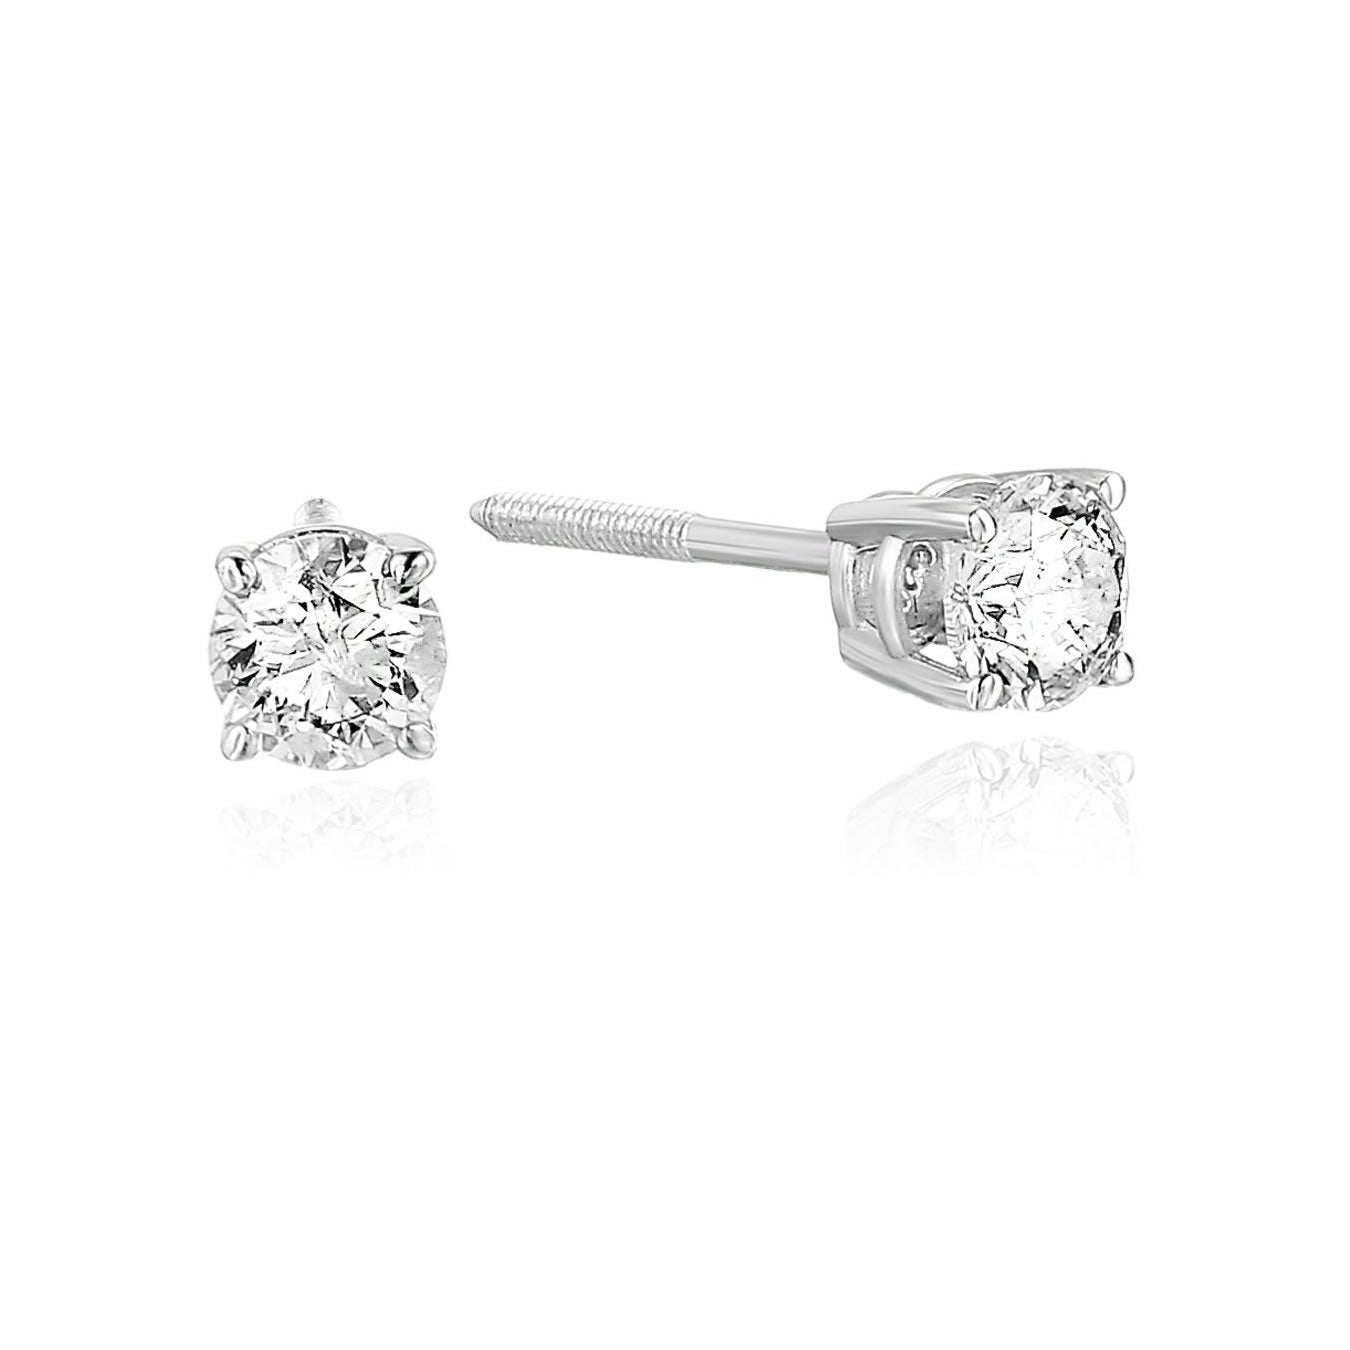 1/2 cttw VS2-SI1 Certified Diamond Stud Earrings 14K White or Yellow Gold Round with Screw Backs